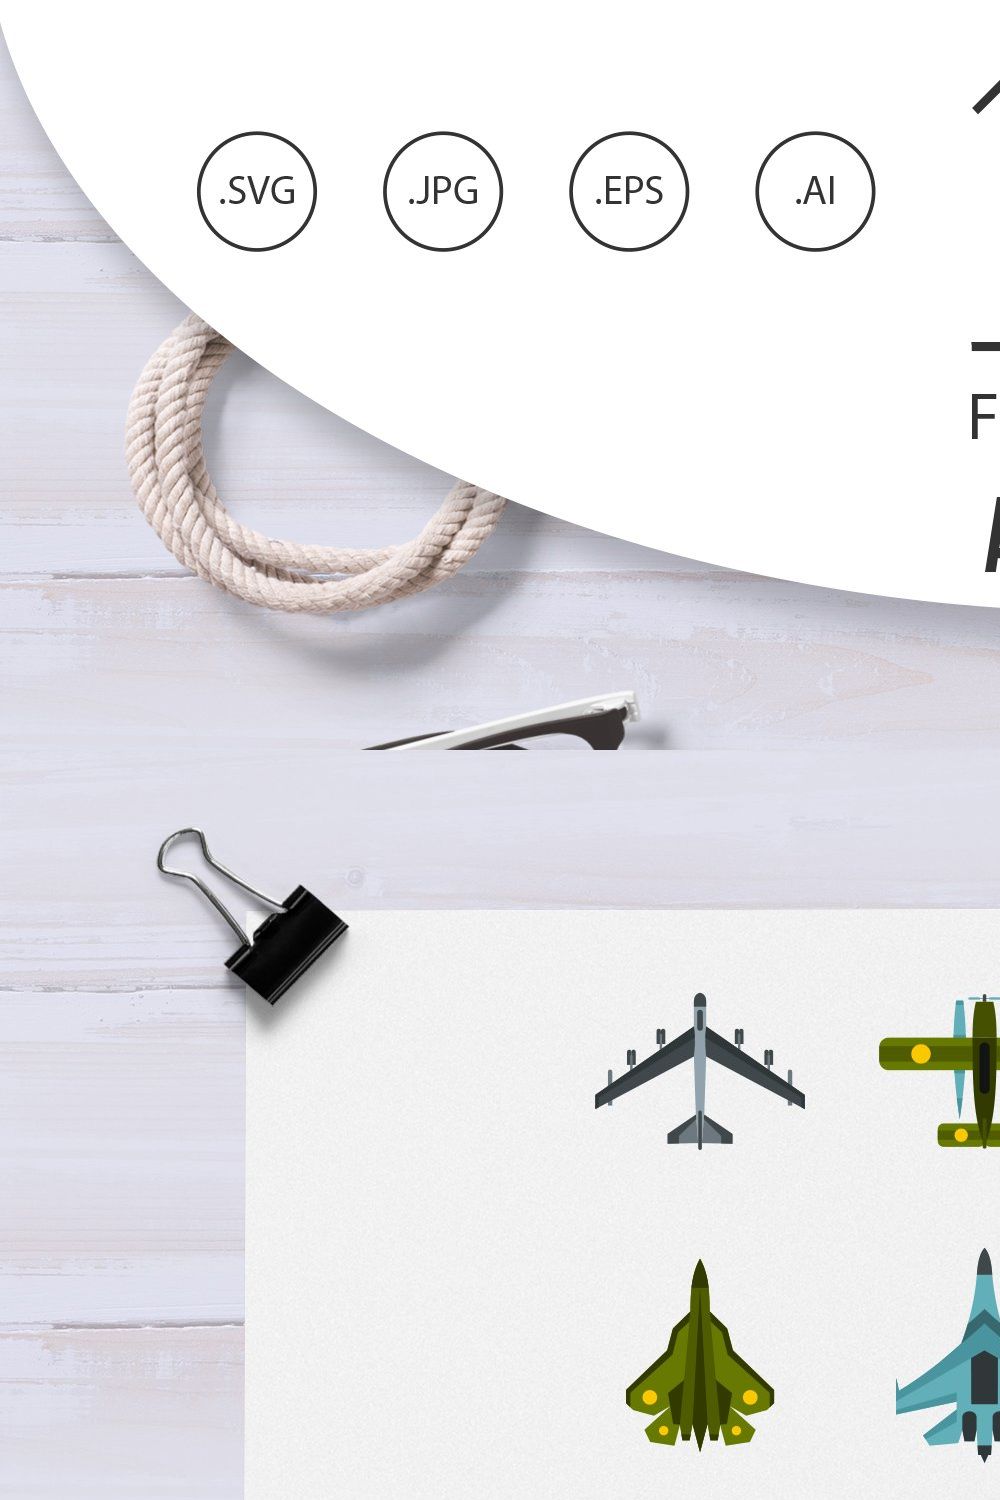 Aviation icons set, flat style pinterest preview image.